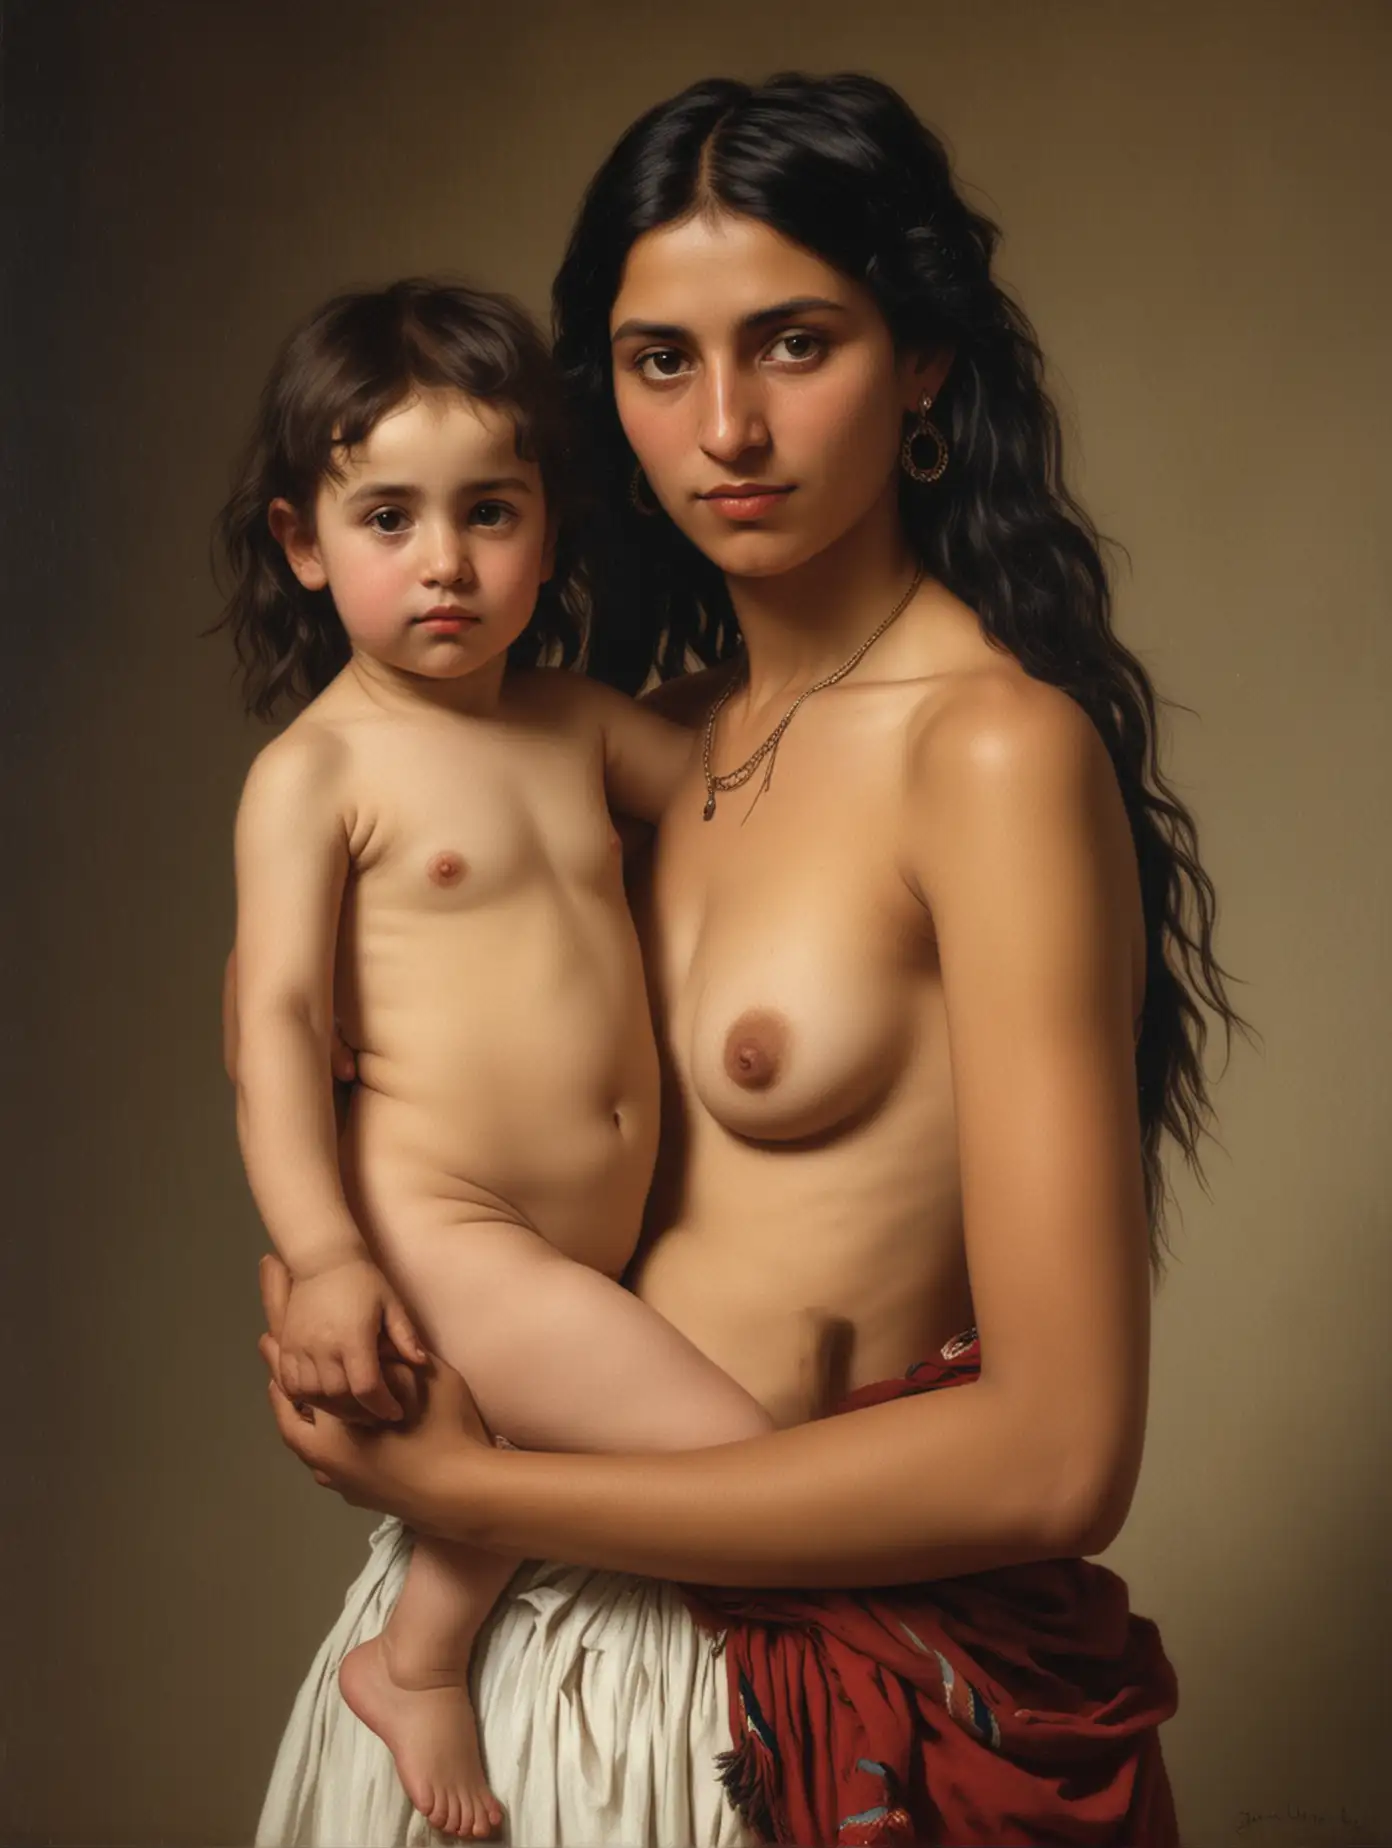 Jean Leon Gerome portrait of topless gypsy Mother and young daughter.